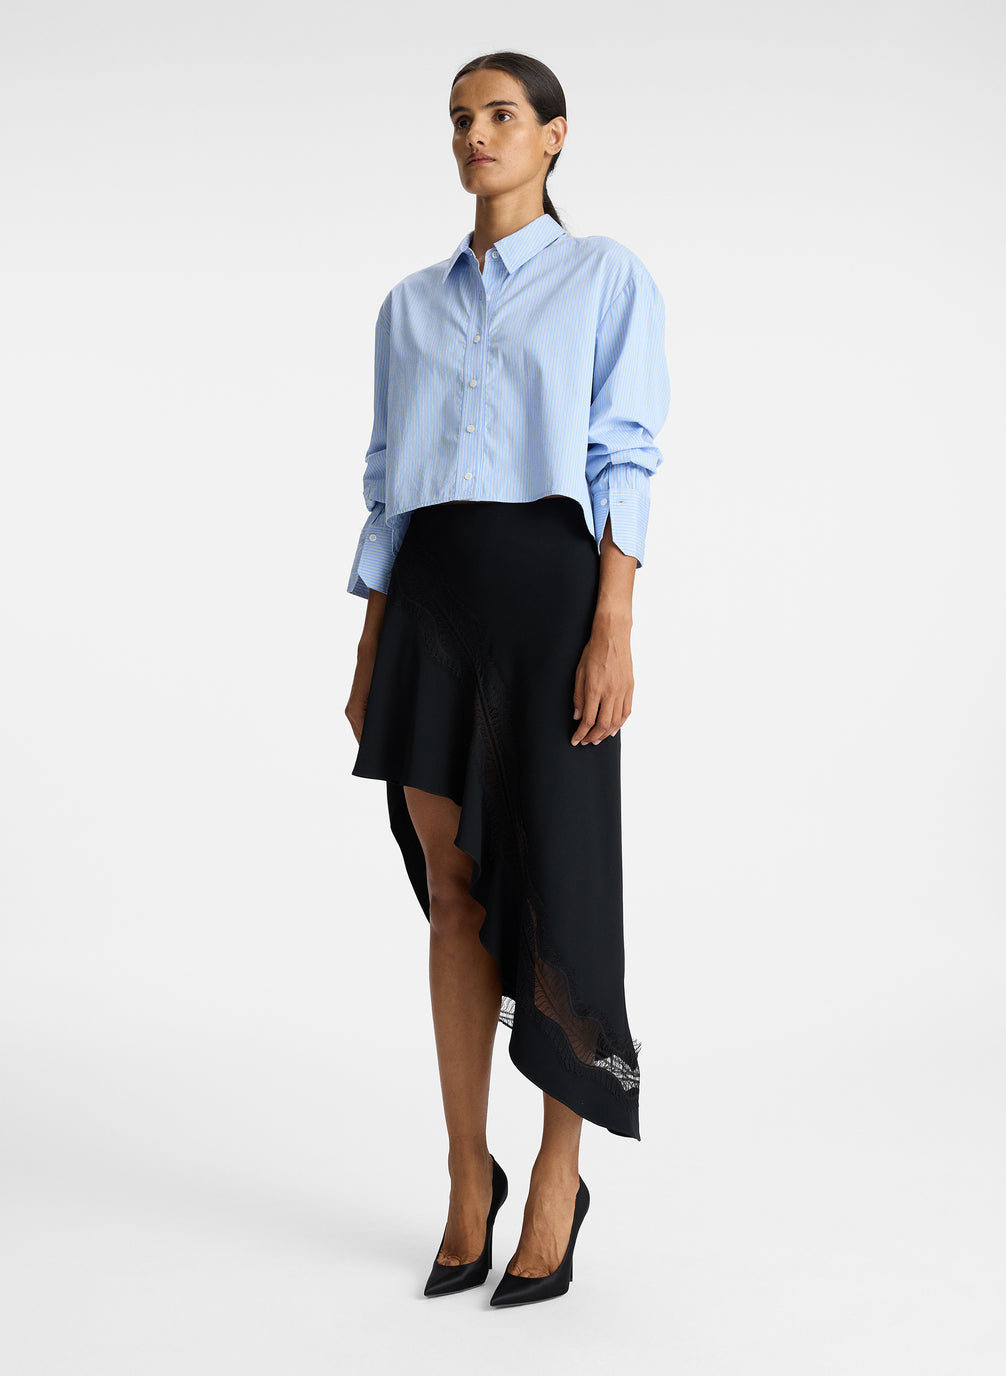 side view of woman wearing blue striped button down collared shirt and asymmetric black satin and lace skirt